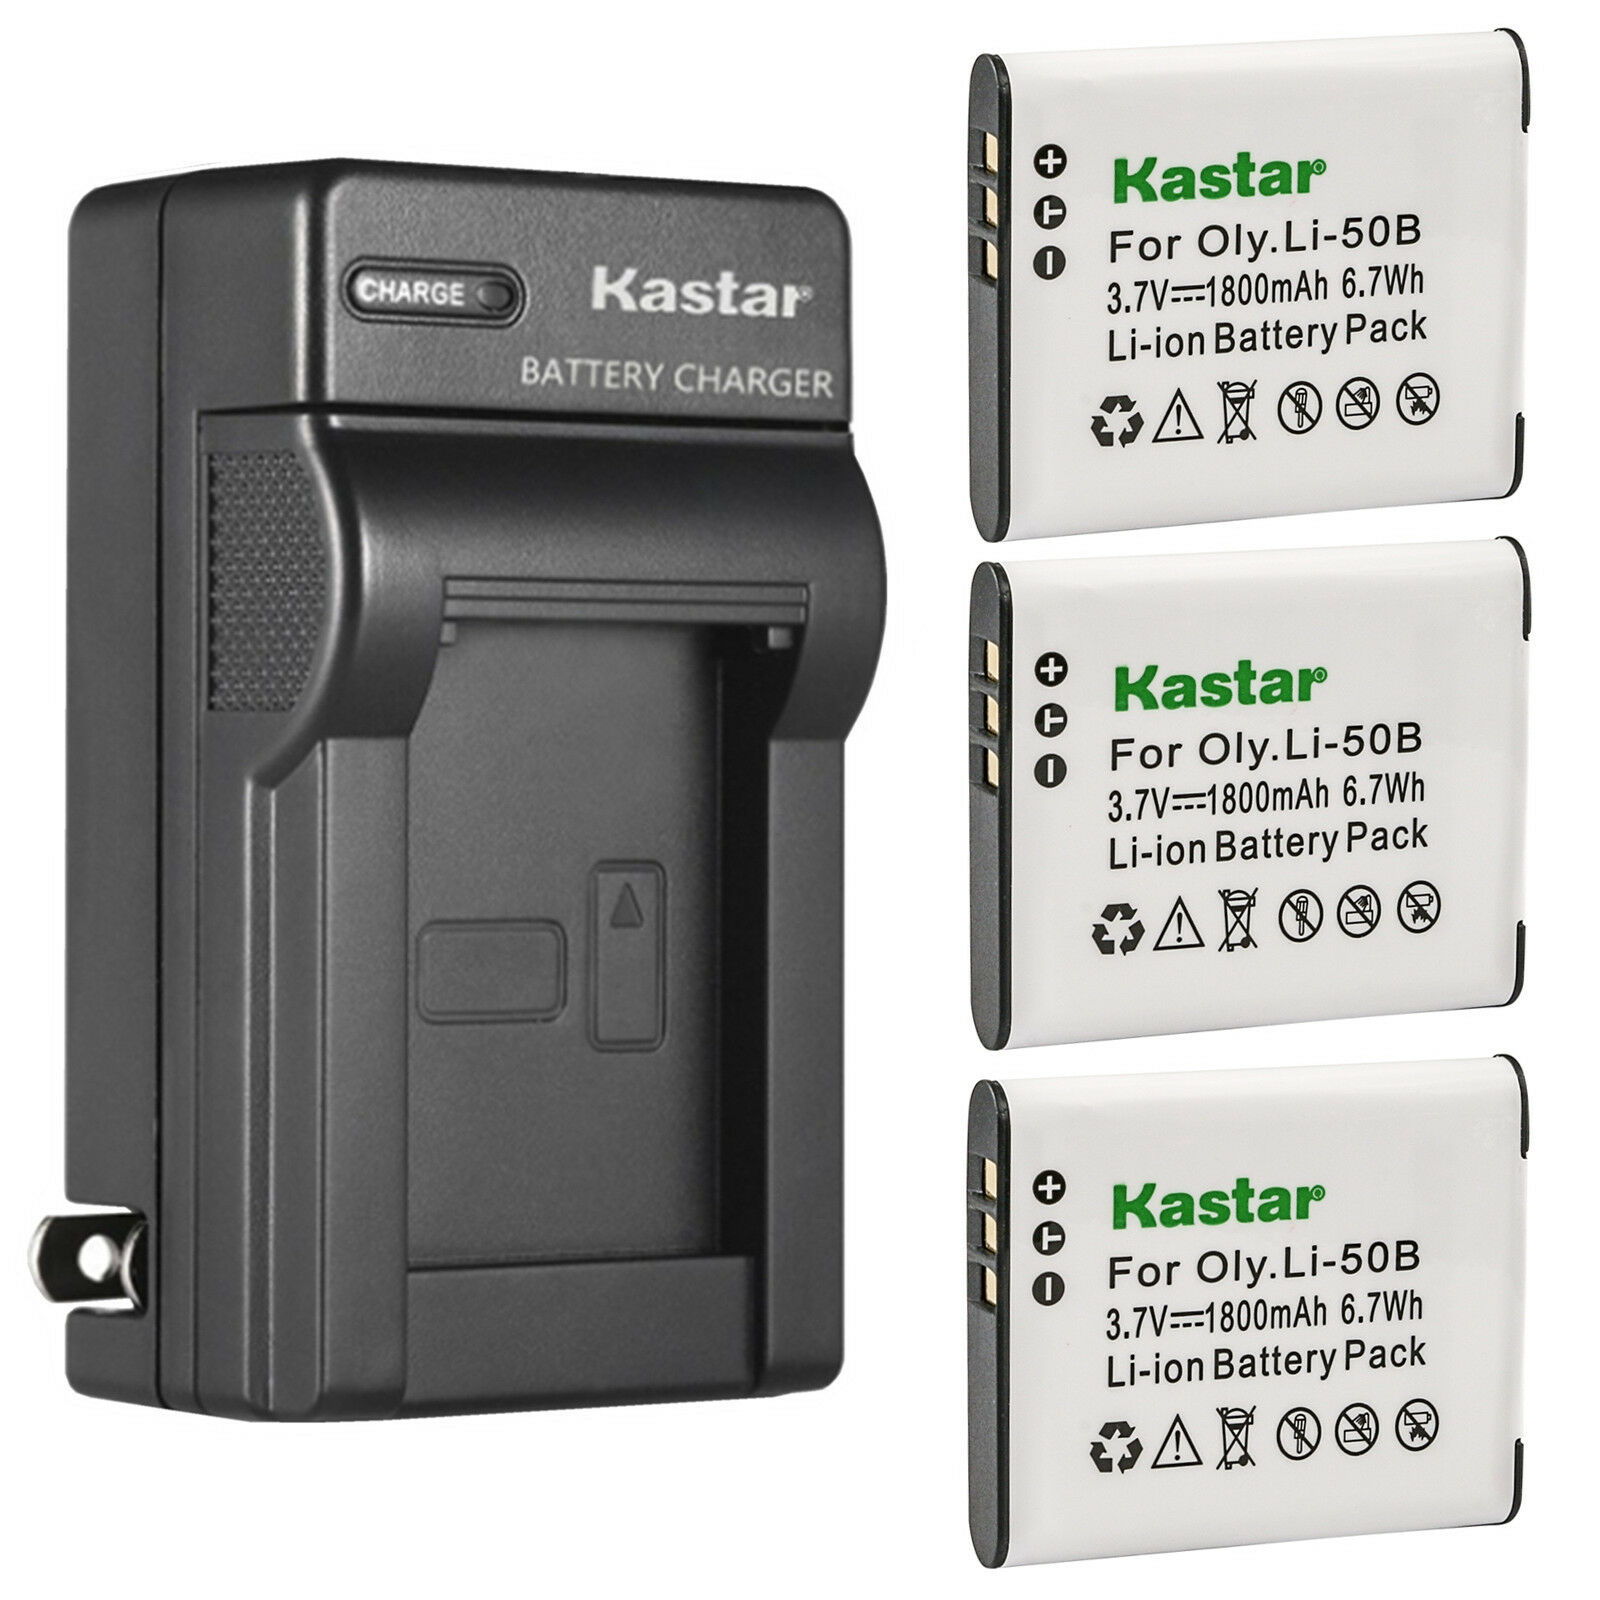 Kastar 3-Pack Battery and AC Wall Charger Replacement for Olympus Li-50B, Tough TG-620 iHS, Tough TG-630 iHS, Tough TG-805, Tough TG-810, Tough TG-820 iHS, Tough TG-830 iHS, Tough TG-835, Tough TG-850 - image 1 of 6